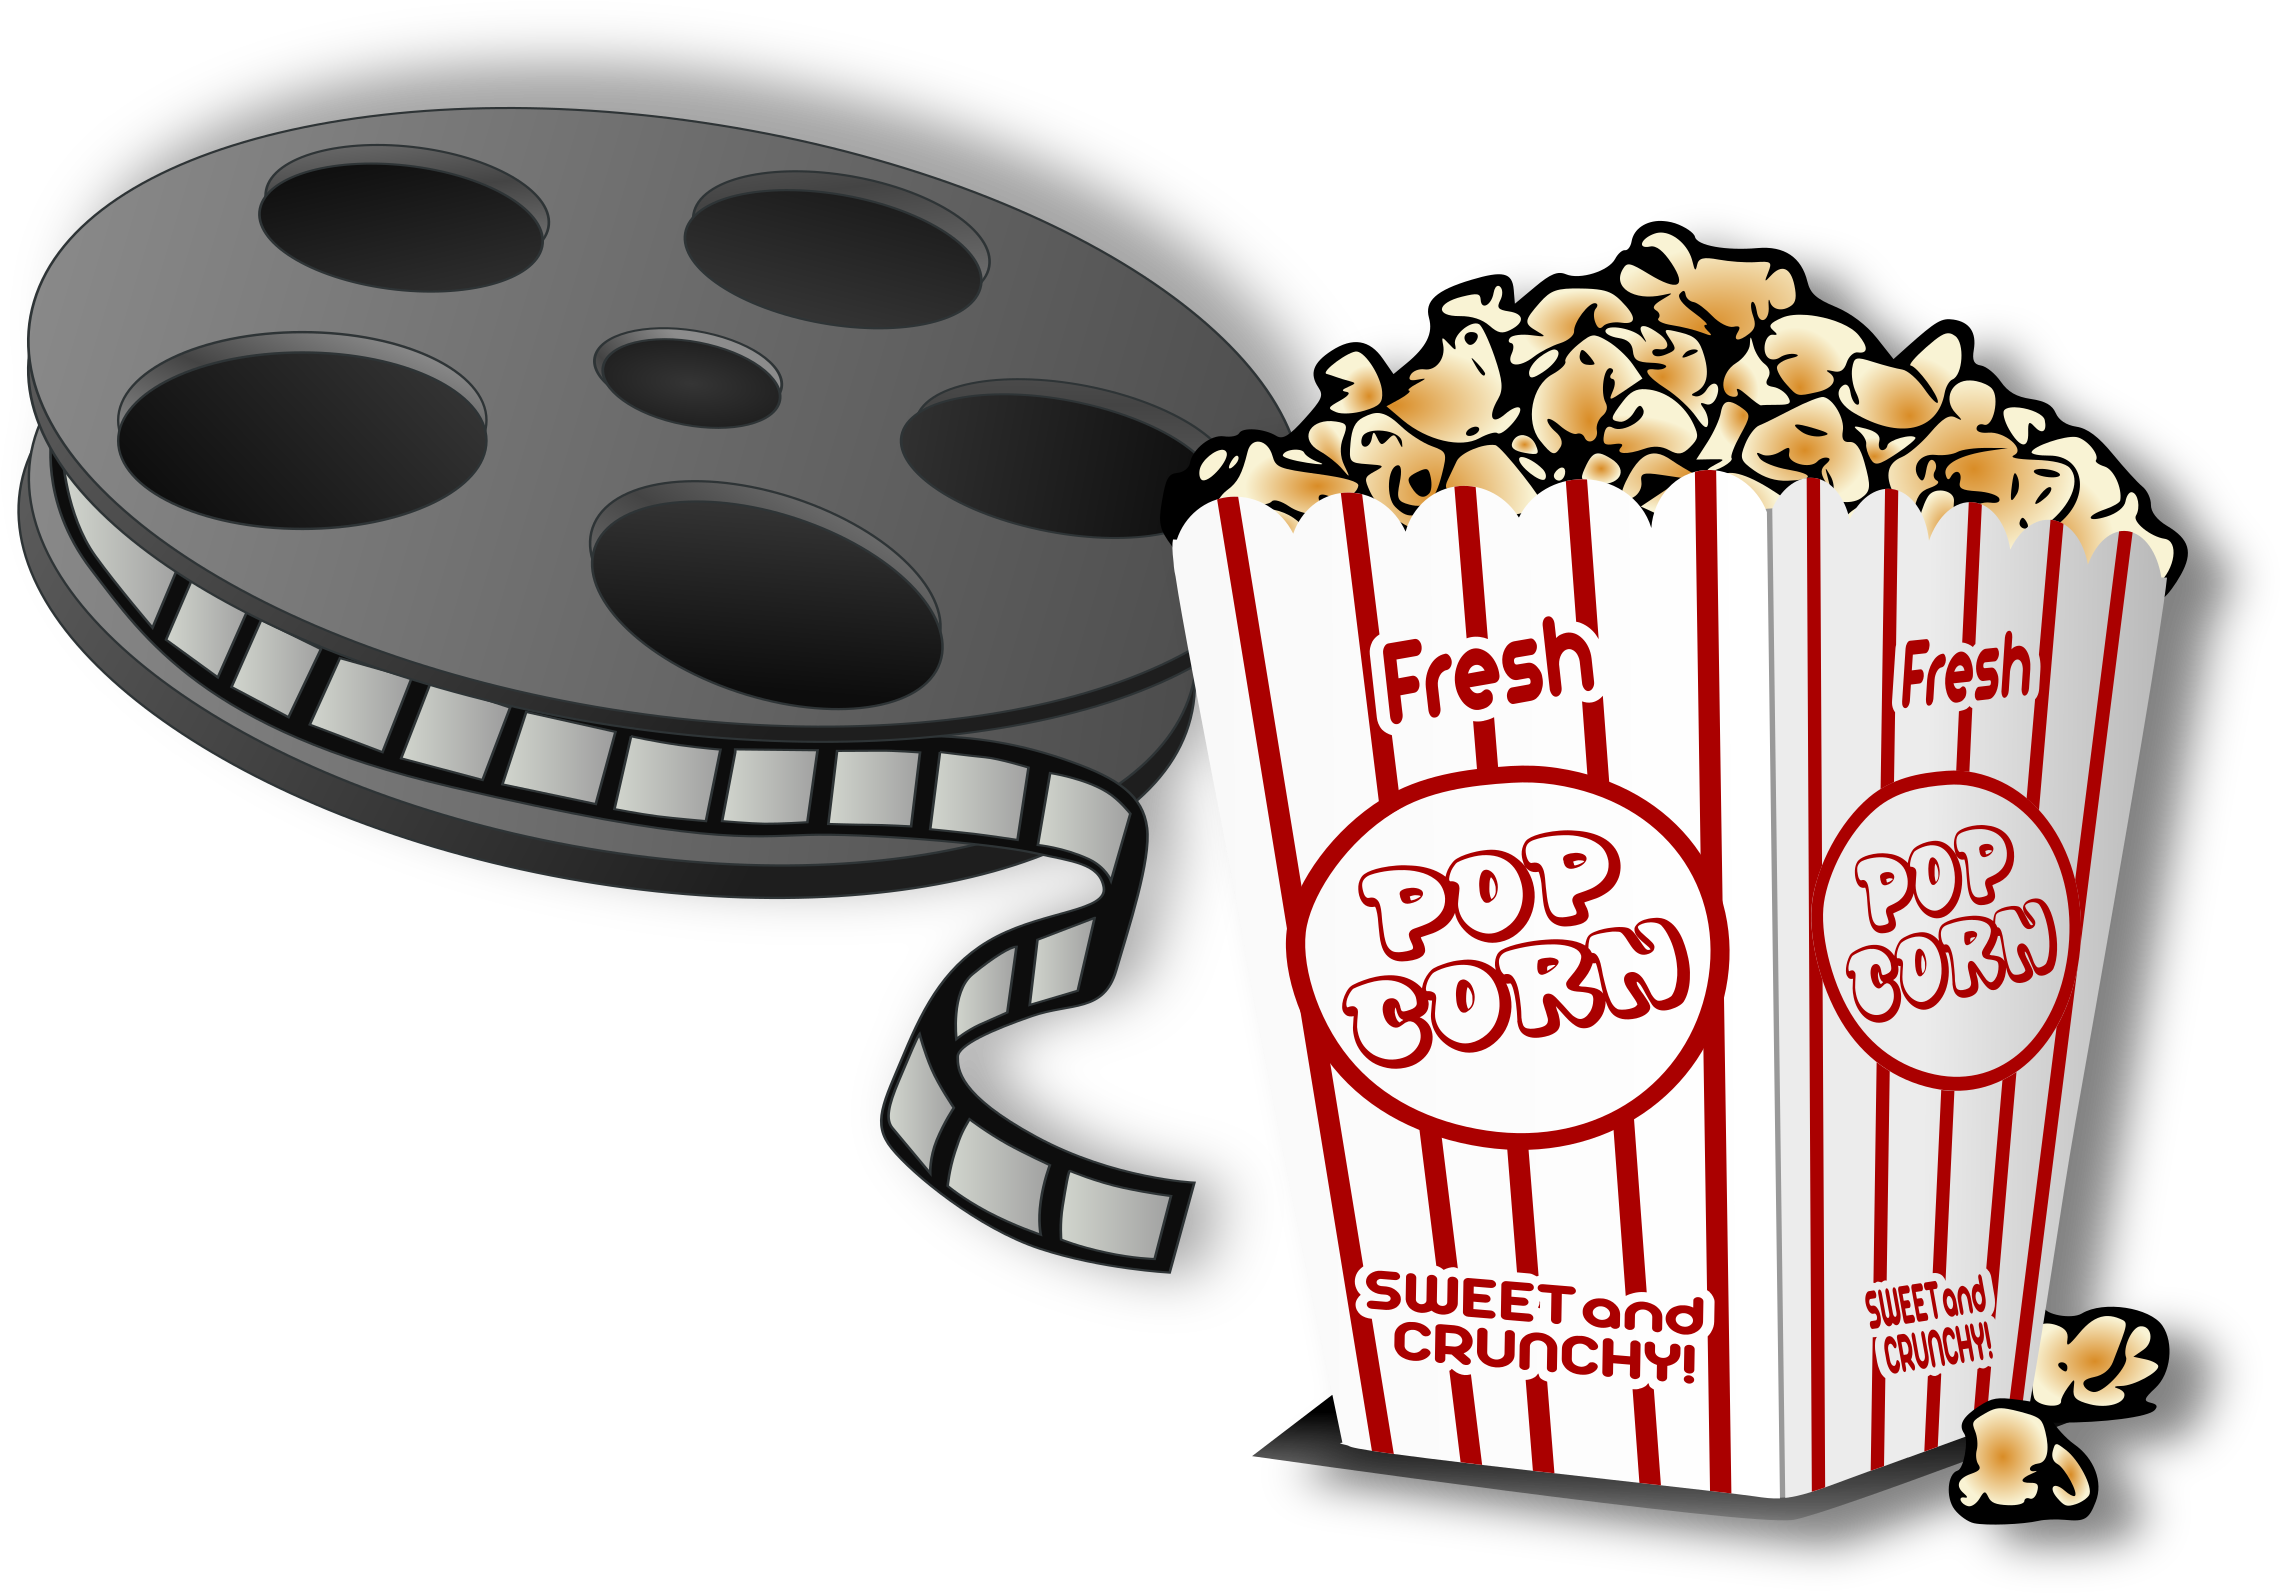 3 Must-see Videos On Agile Estimating - Popcorn And A Movie (2400x1775)